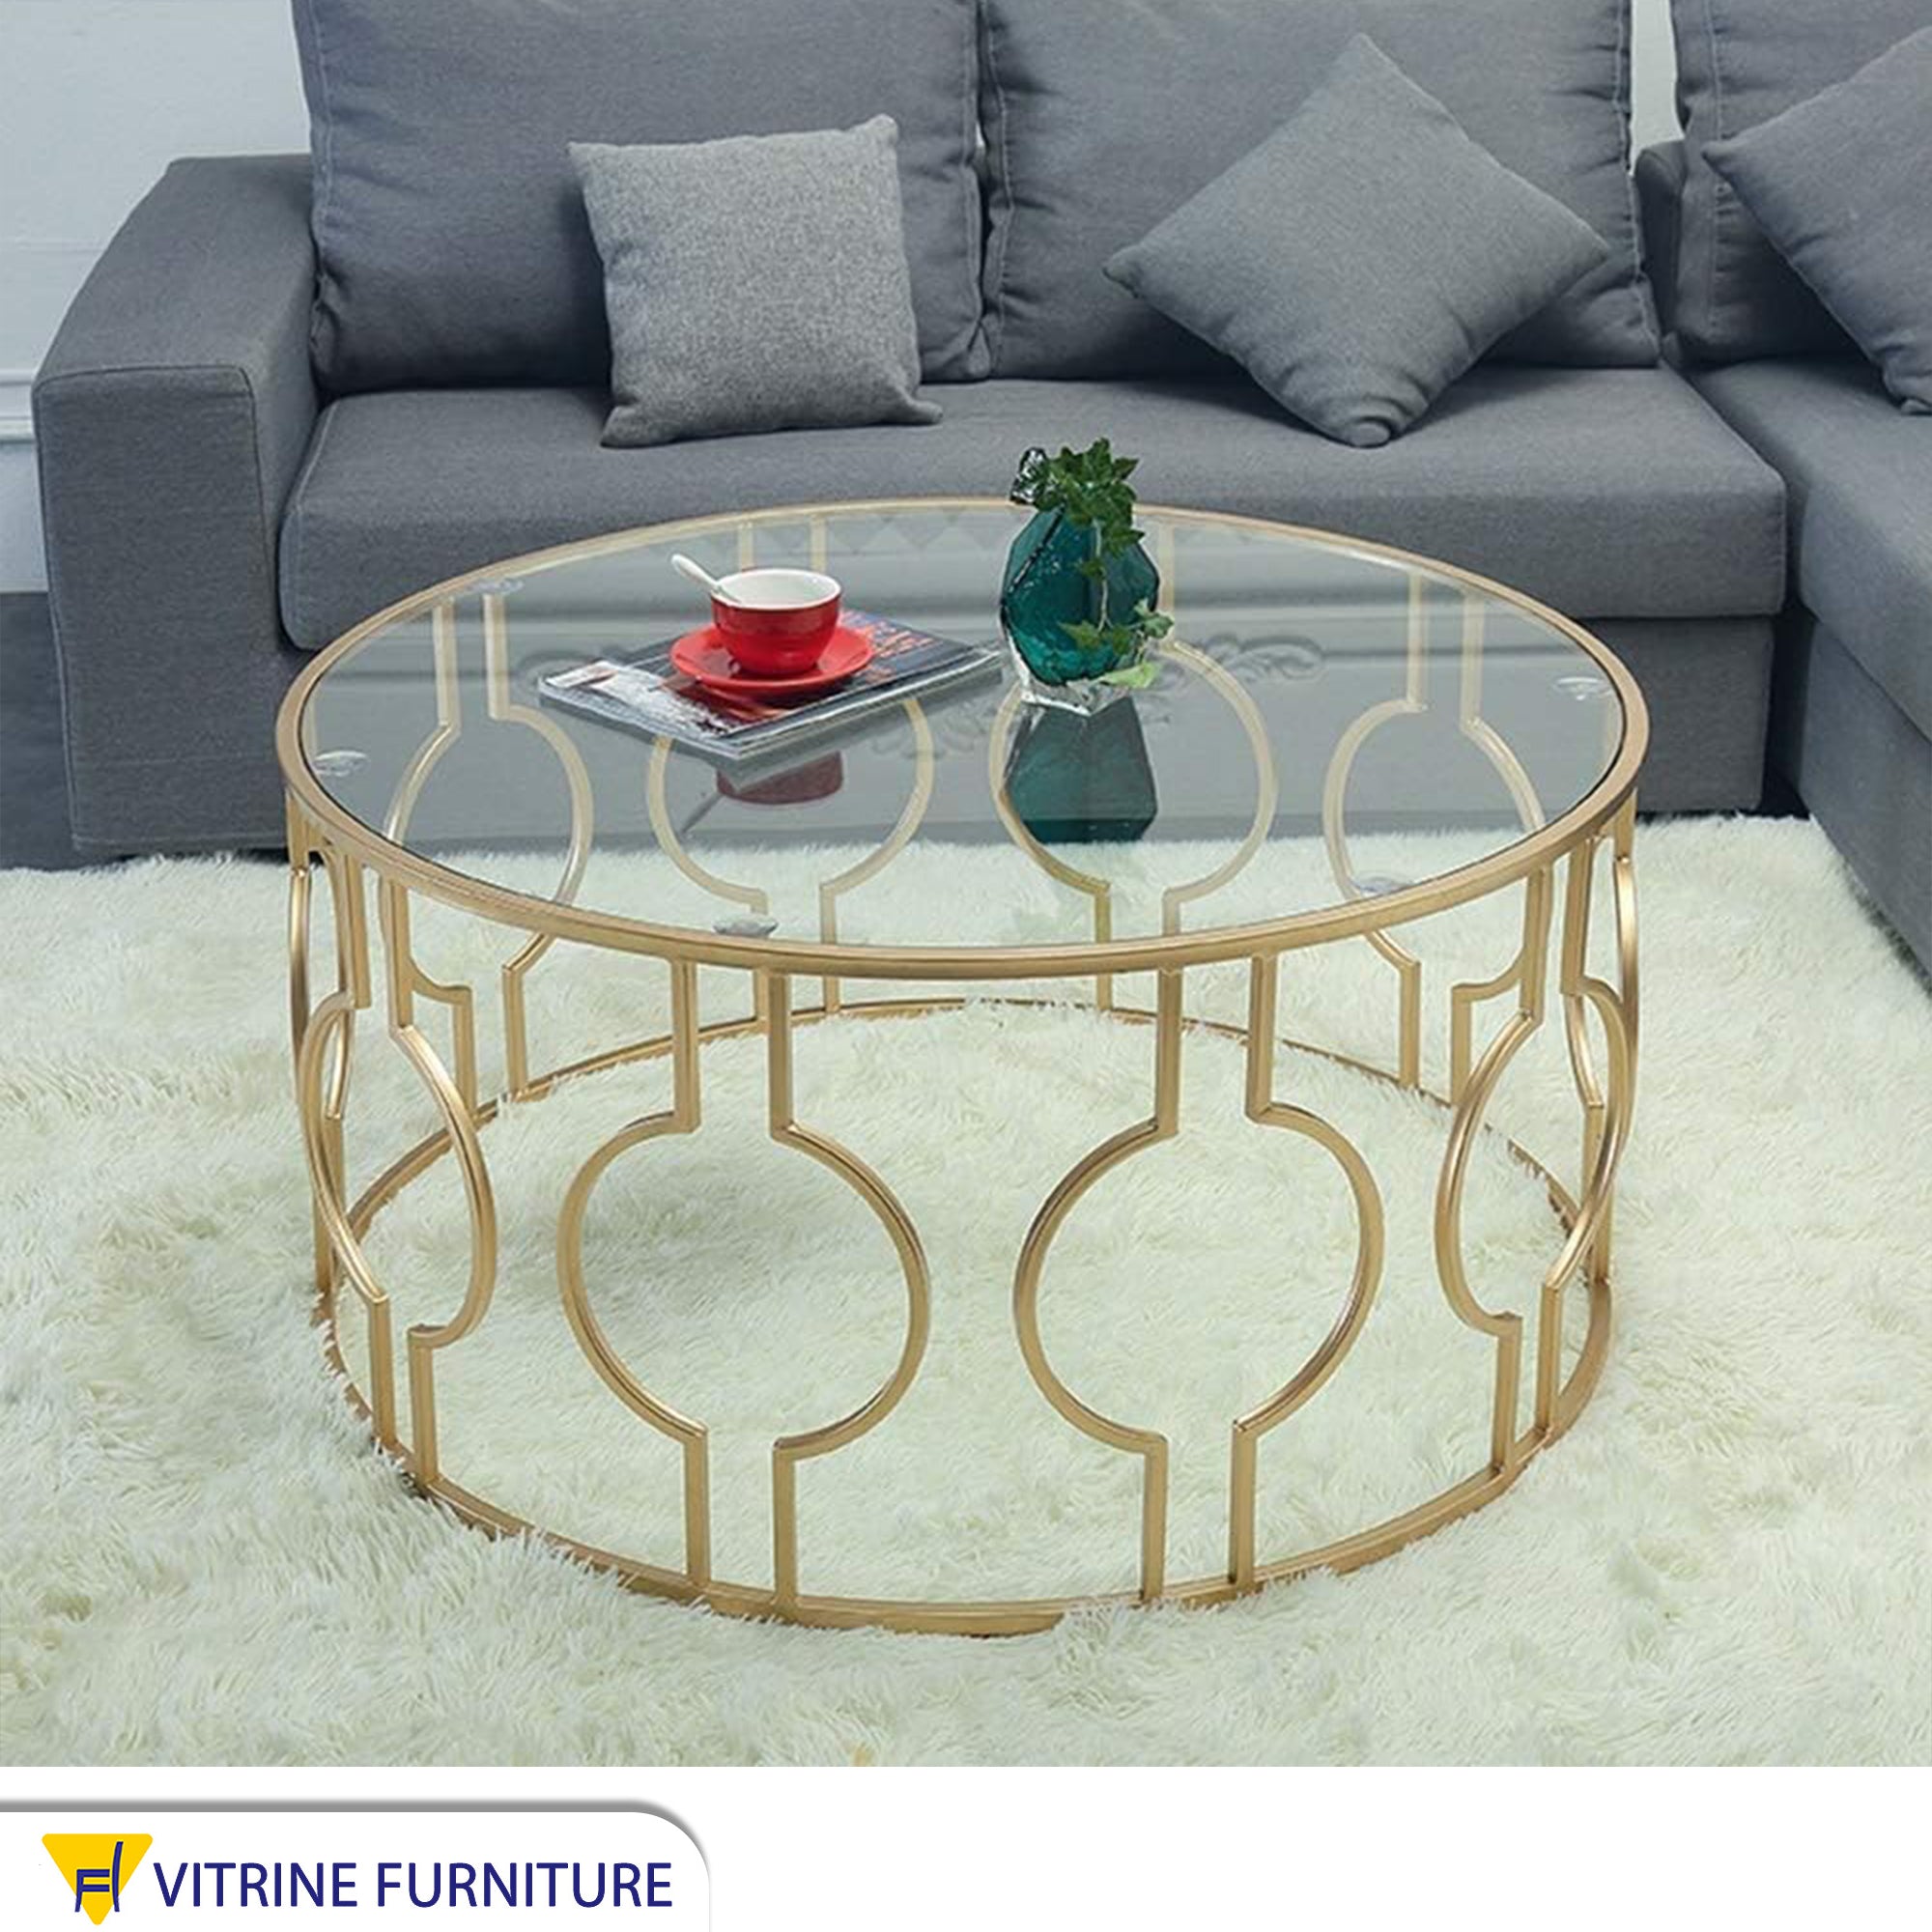 Center table with a decorative metal frame